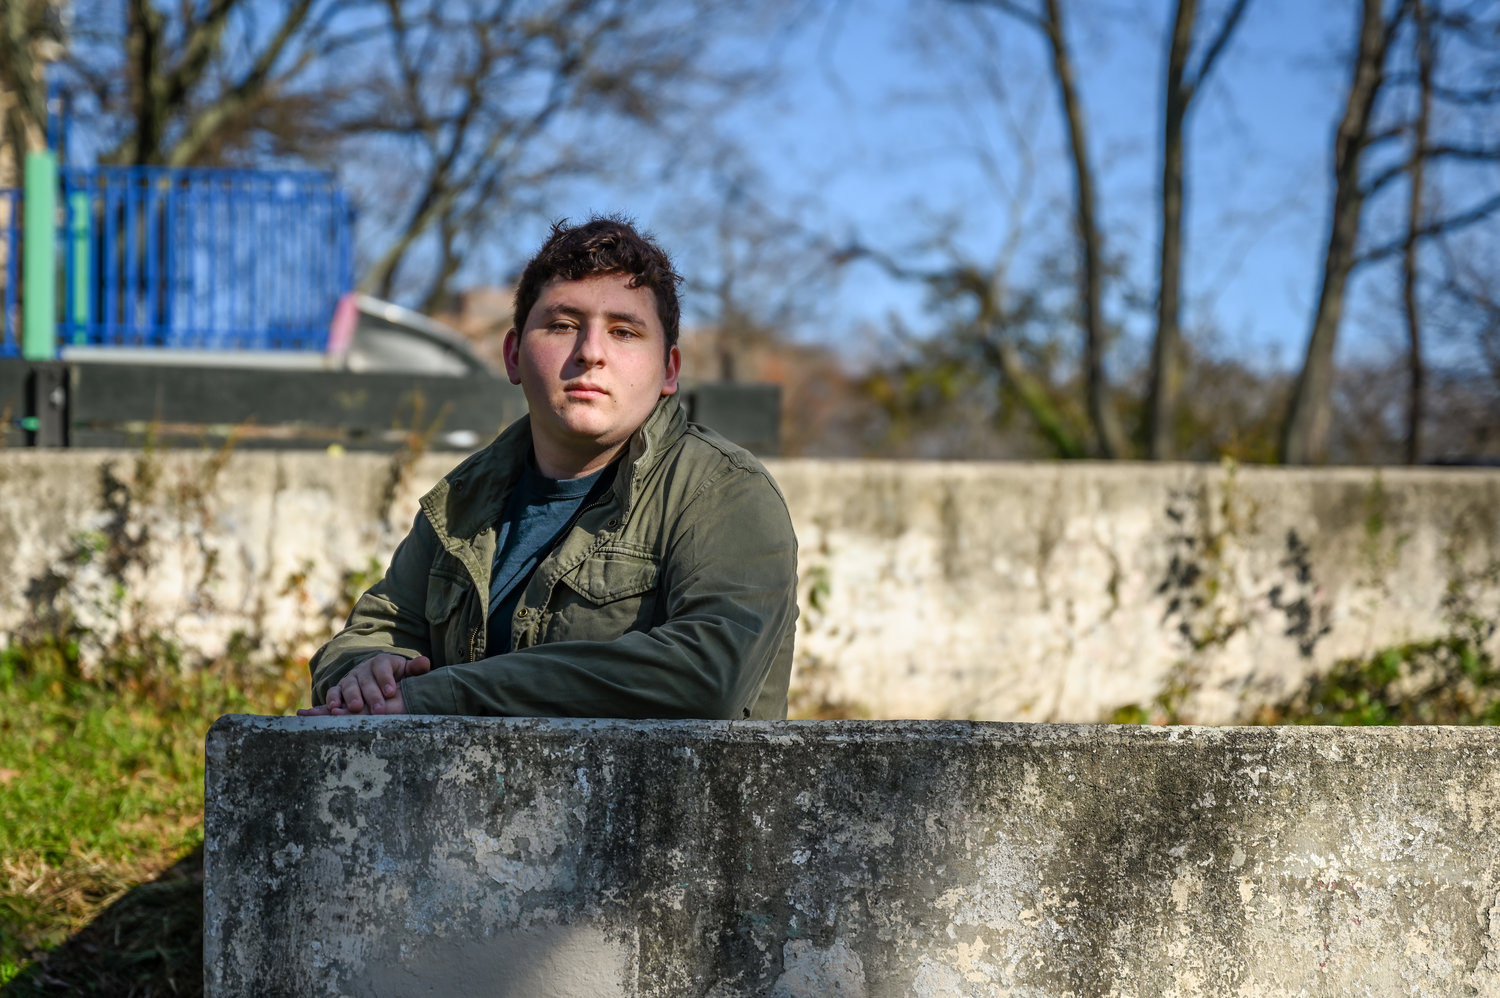 Although it’s only November, senior Raphy Jacobson worries he’ll miss out on pivotal high school memories like prom and graduation. He’s one of nearly 1.1 million students in the city’s public school system learning from home for the foreseeable future, since public school buildings shuttered last week due after a rise in positive coronavirus test rates.